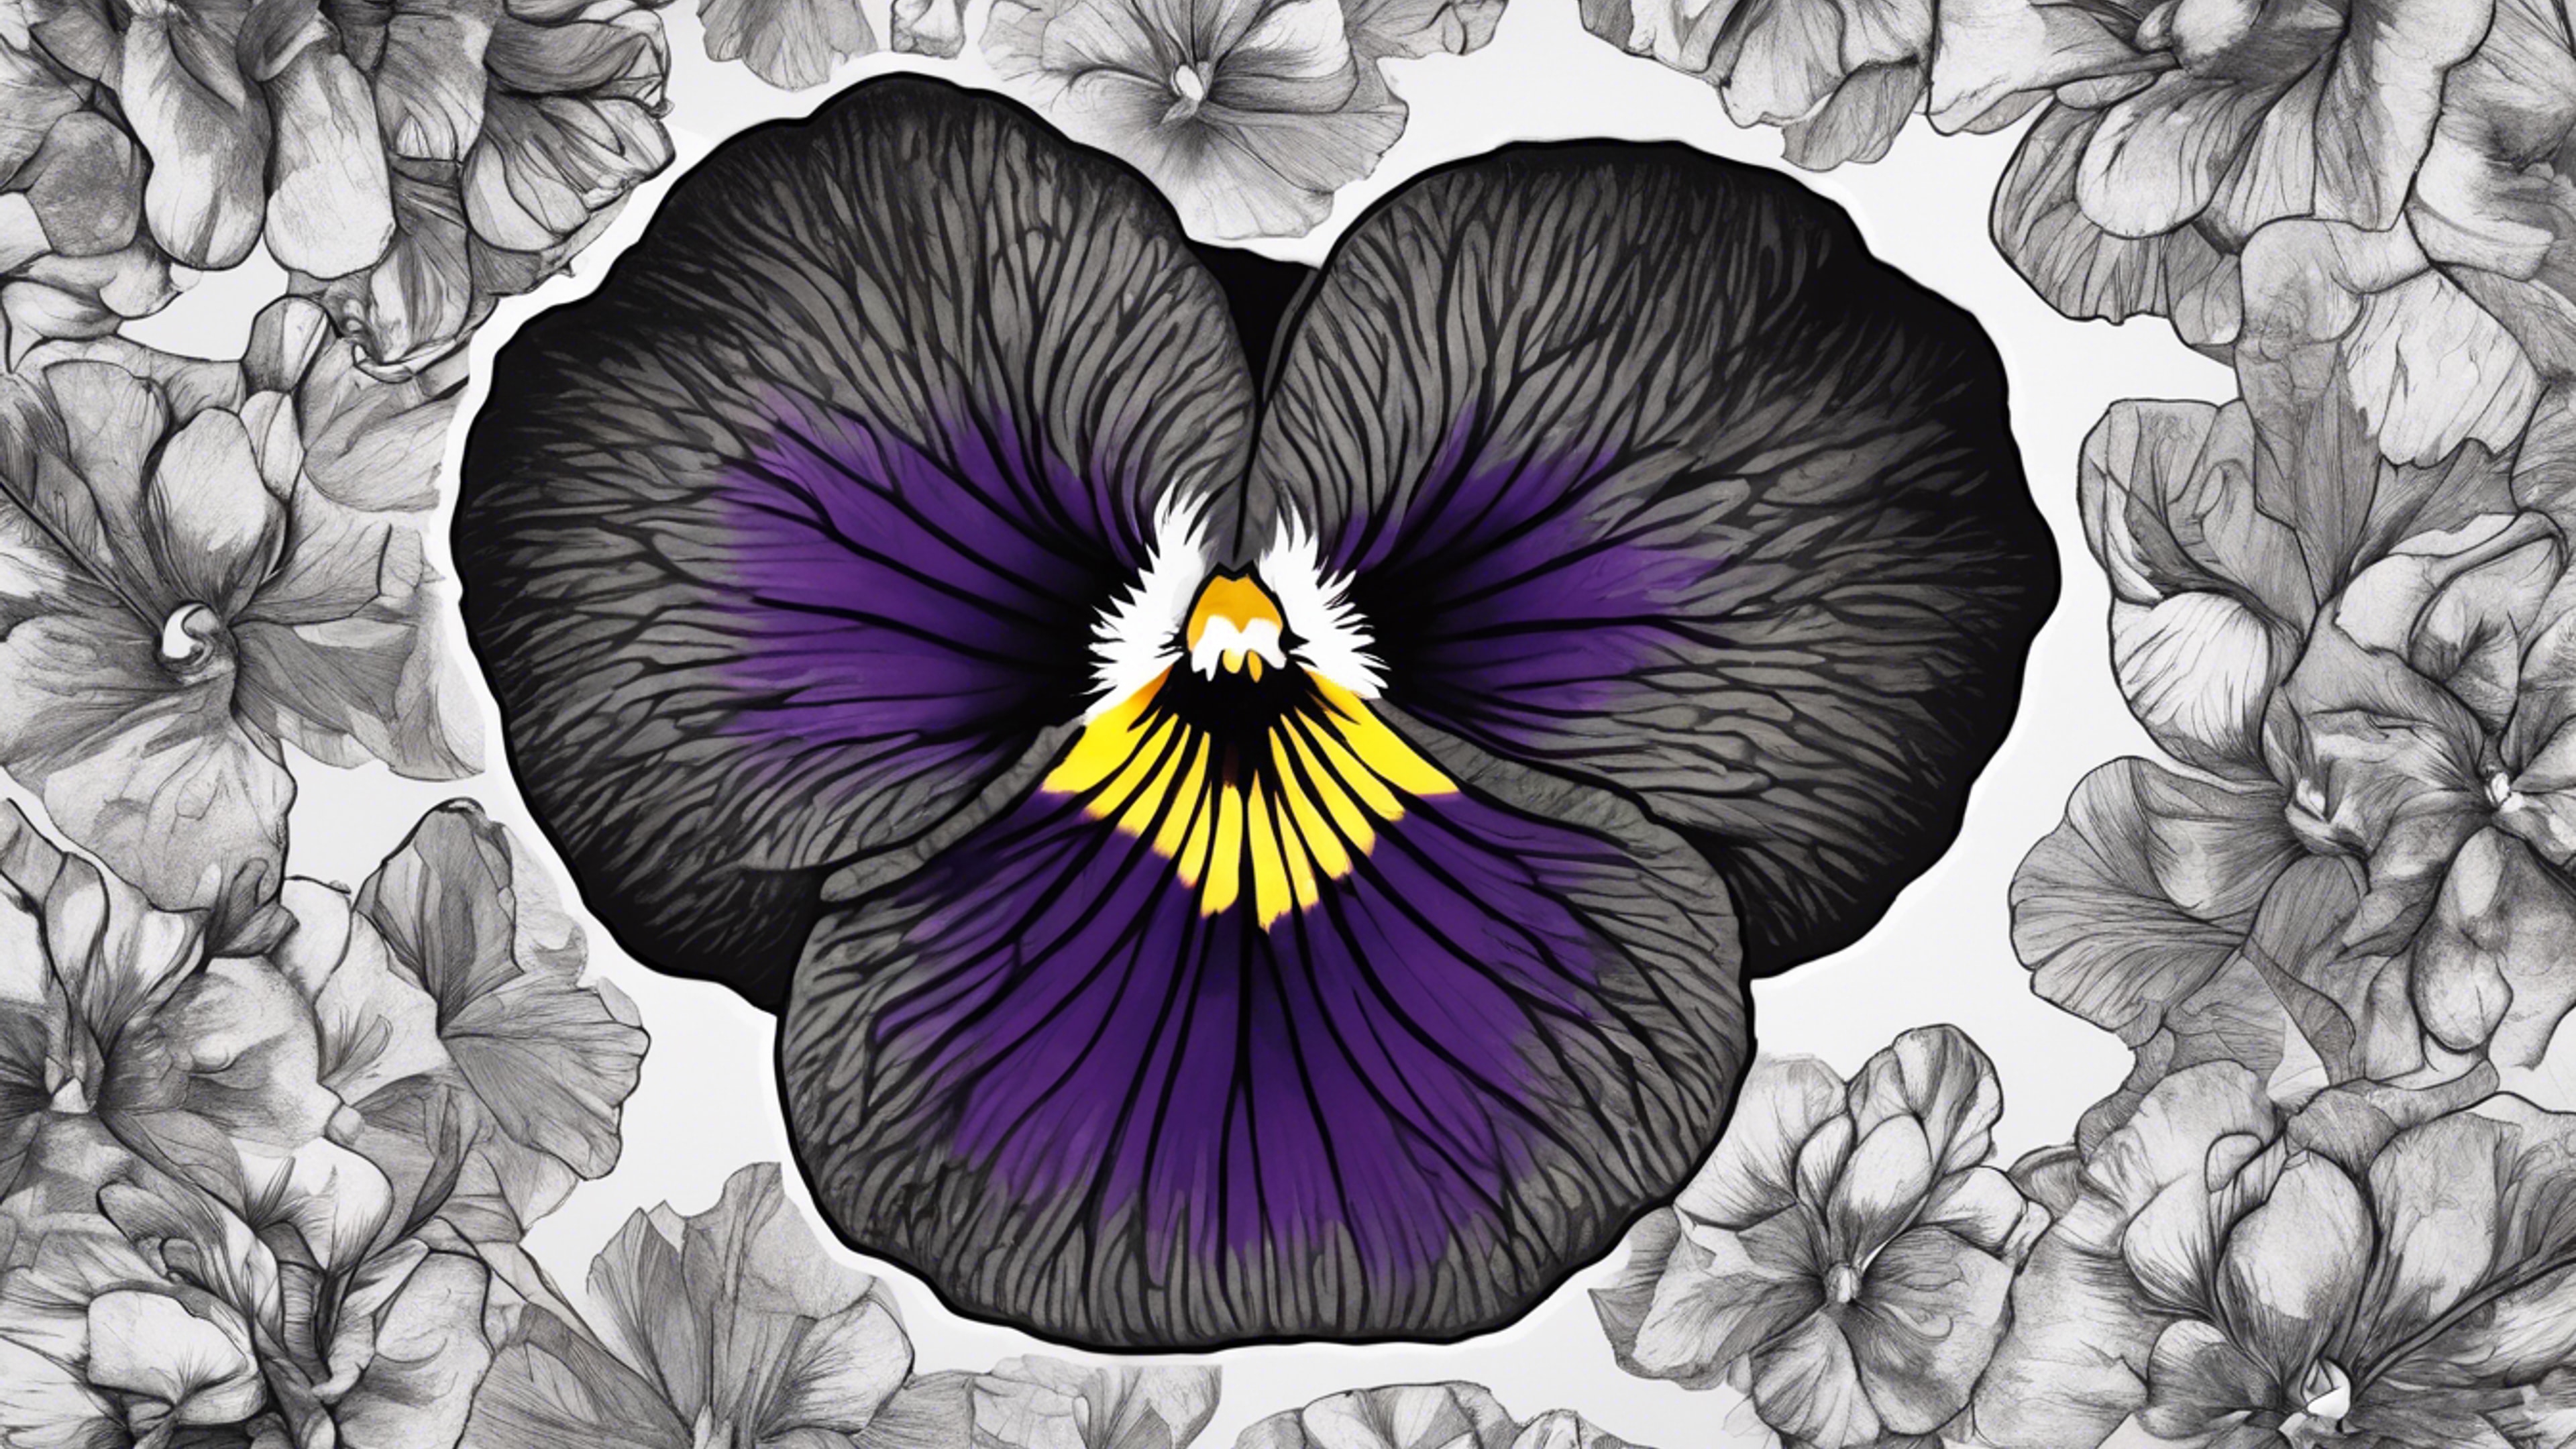 A beautifully detailed drawing of a black pansy with a heart-shaped pattern in the center. ផ្ទាំង​រូបភាព[63bdabf8c2fc479fa211]